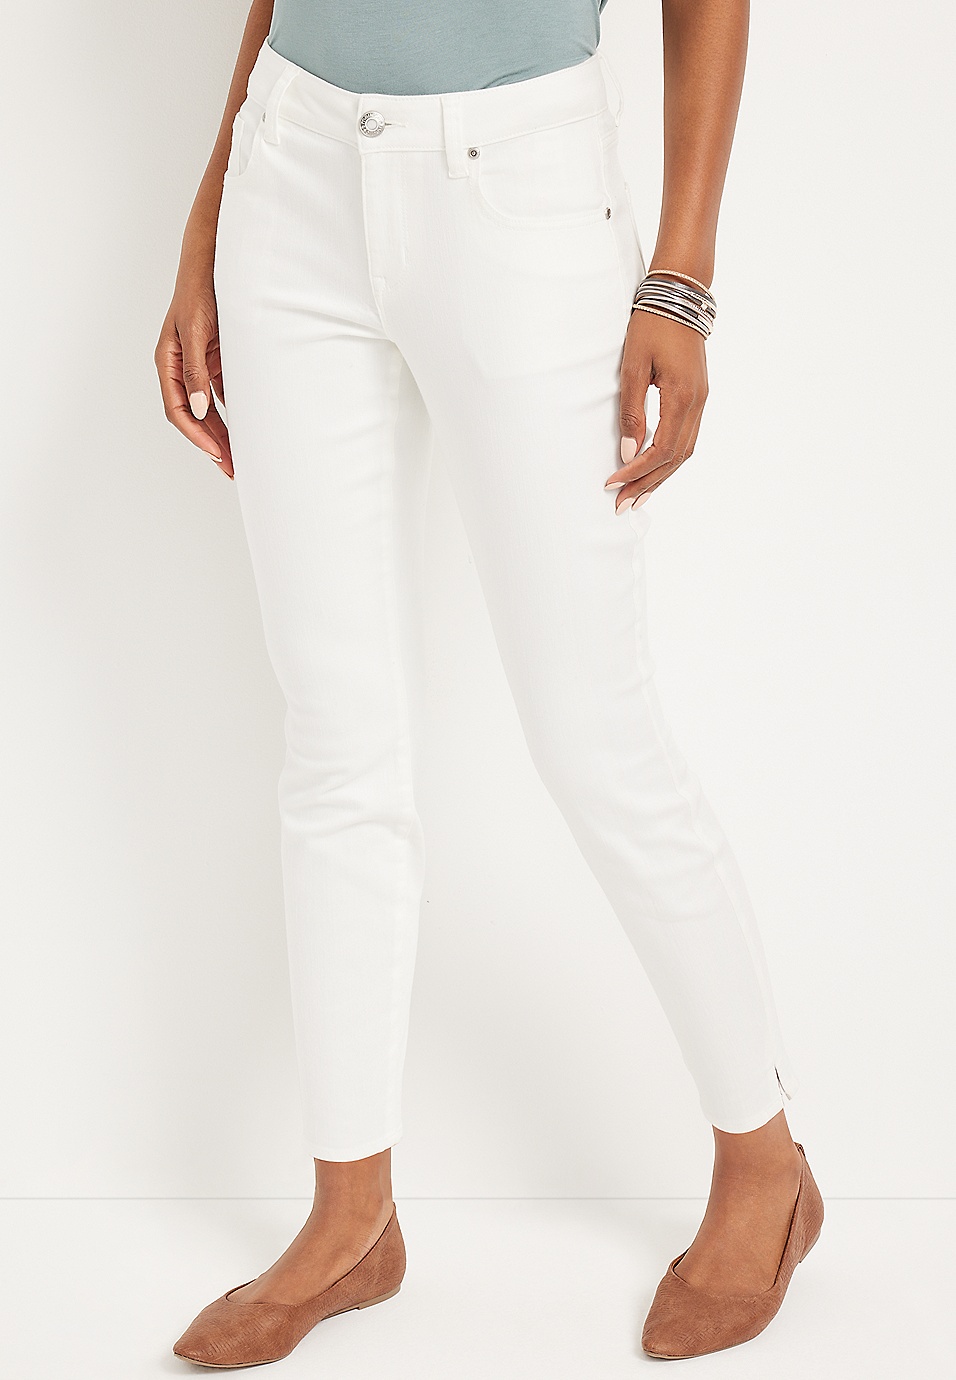 m jeans by maurices™ Skinny Mid Rise Side Slit Ankle Jegging | maurices